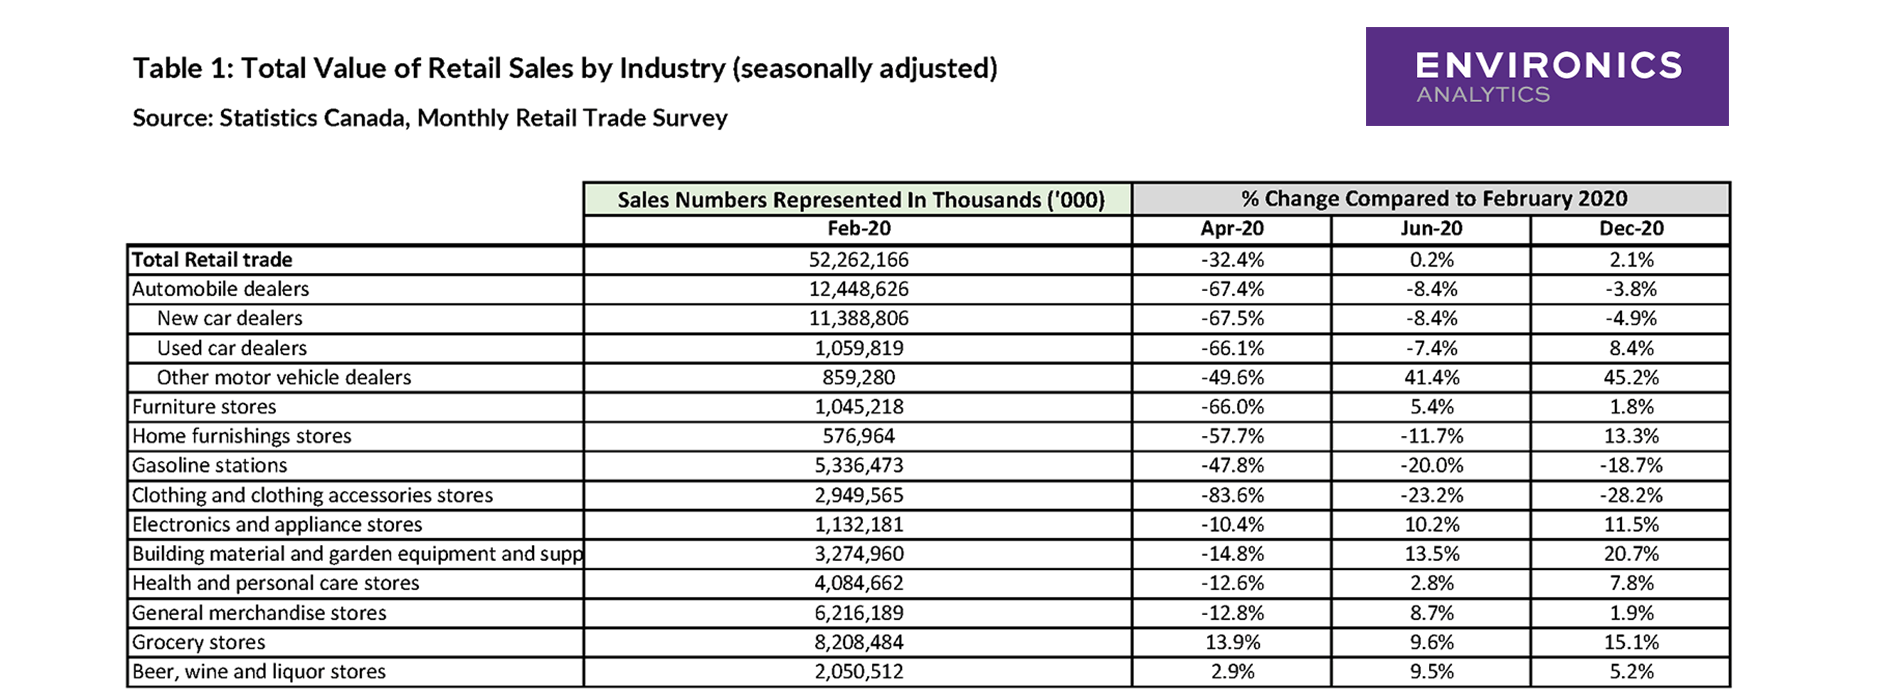 Table 1 Total Value of Retail Sales by Industry